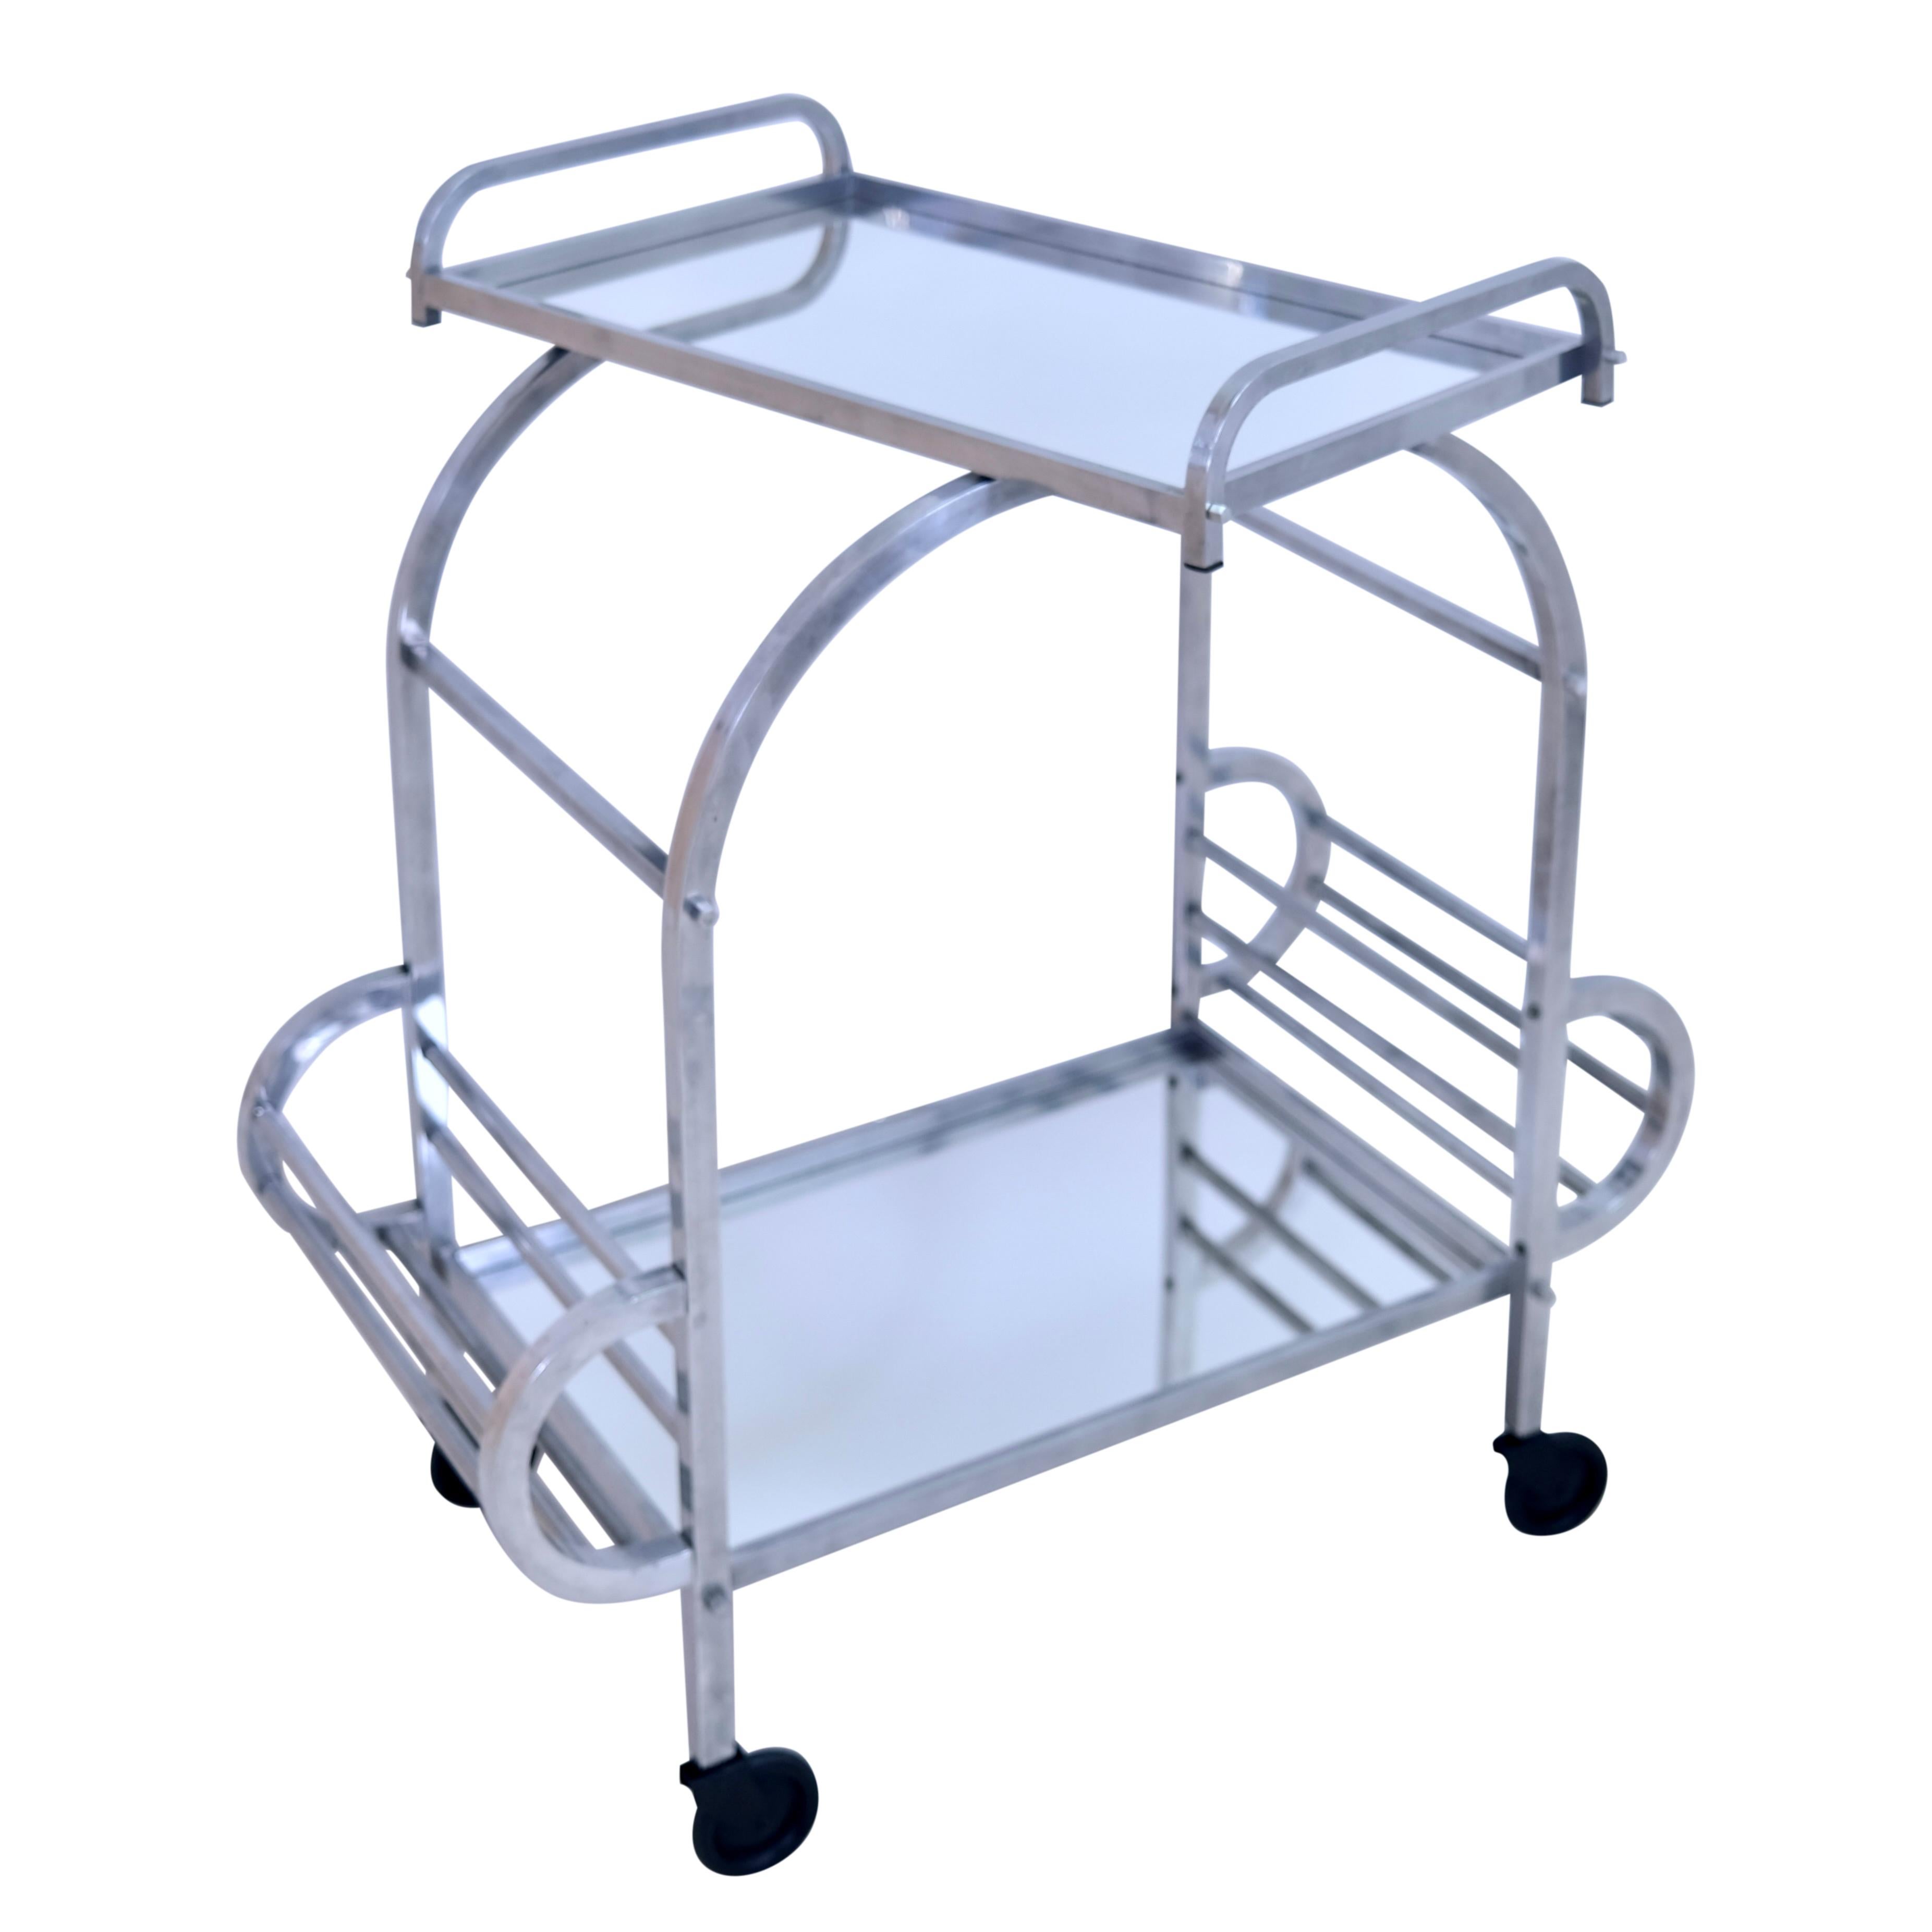 Bar cart with removable tray and side bottle holders
Aluminum

Original Art Deco, France 1930s

Dimensions:
Width: 80 cm
height: 40 cm
Depth: 81 cm.